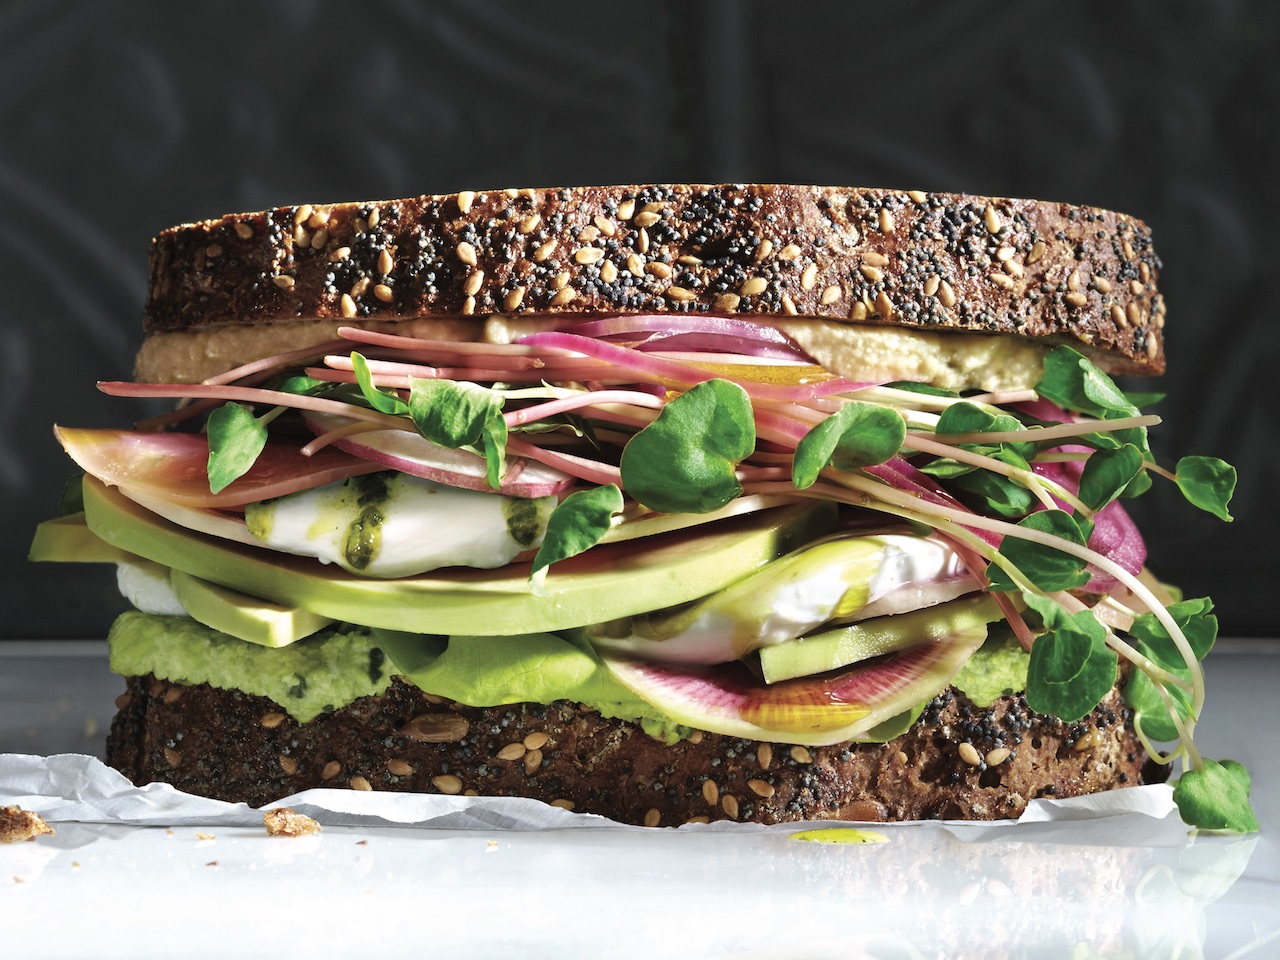 A superfood sandwich with avocado, lettuce, beets, and hummus layered between two slices of grainy bread